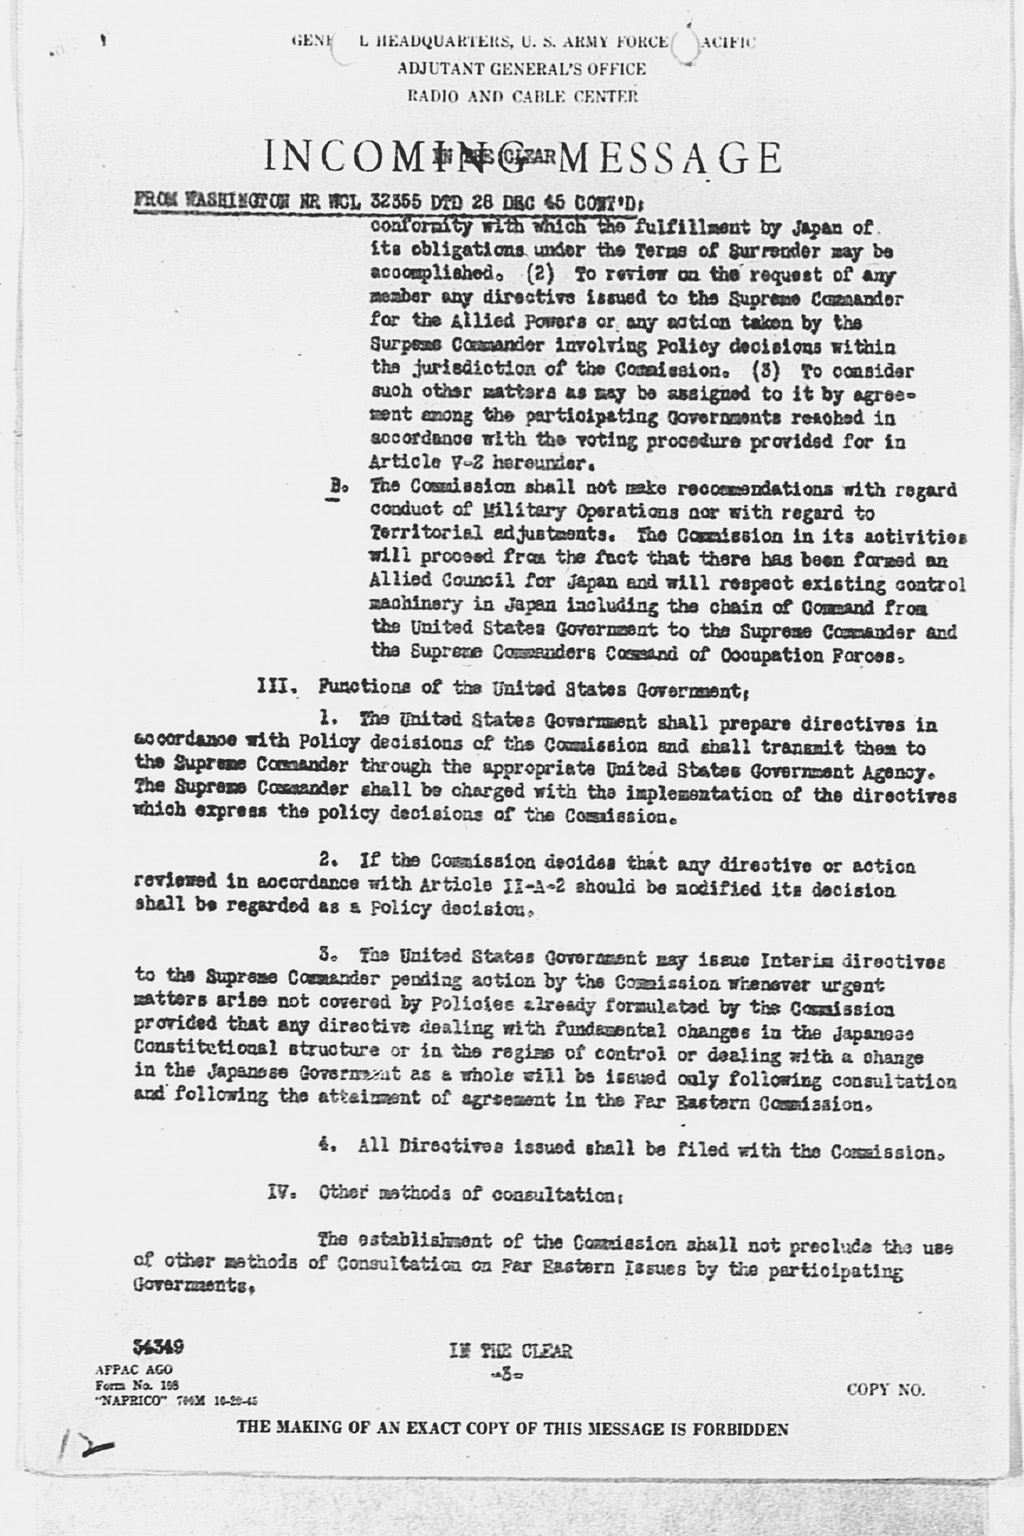 [Incoming Message to CINCAFPAC MacArthur from Washington (War), nr WCL 32355 Communique of Moscow Conference, December 27, 1945](Larger image)